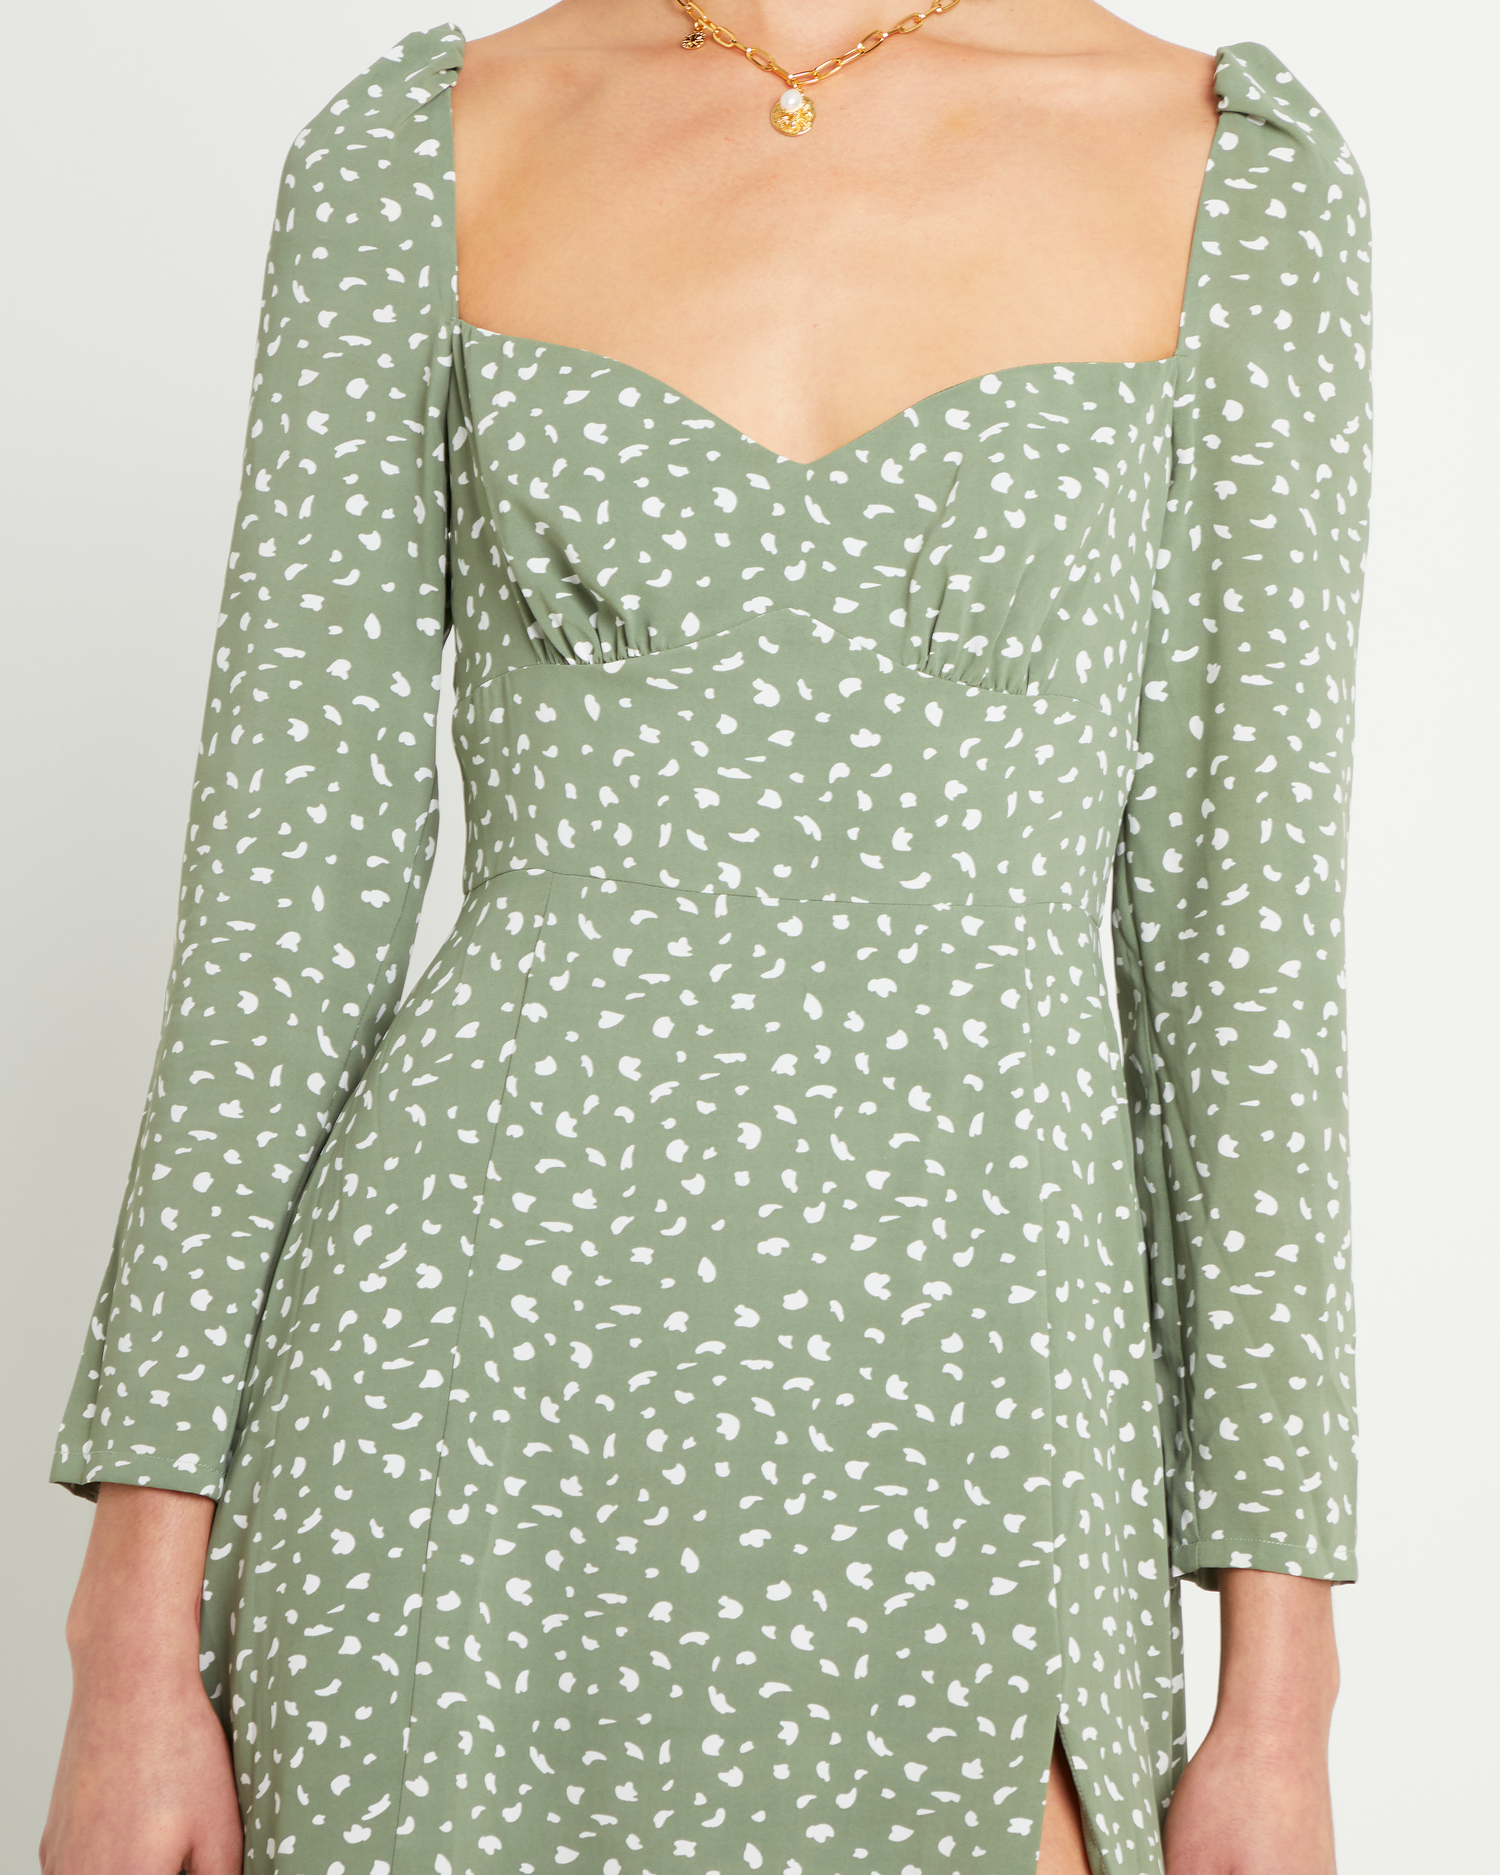 Fifth image of Crimini Dress, a green midi dress, sweetheart neckline, floral, long sleeves, fitted